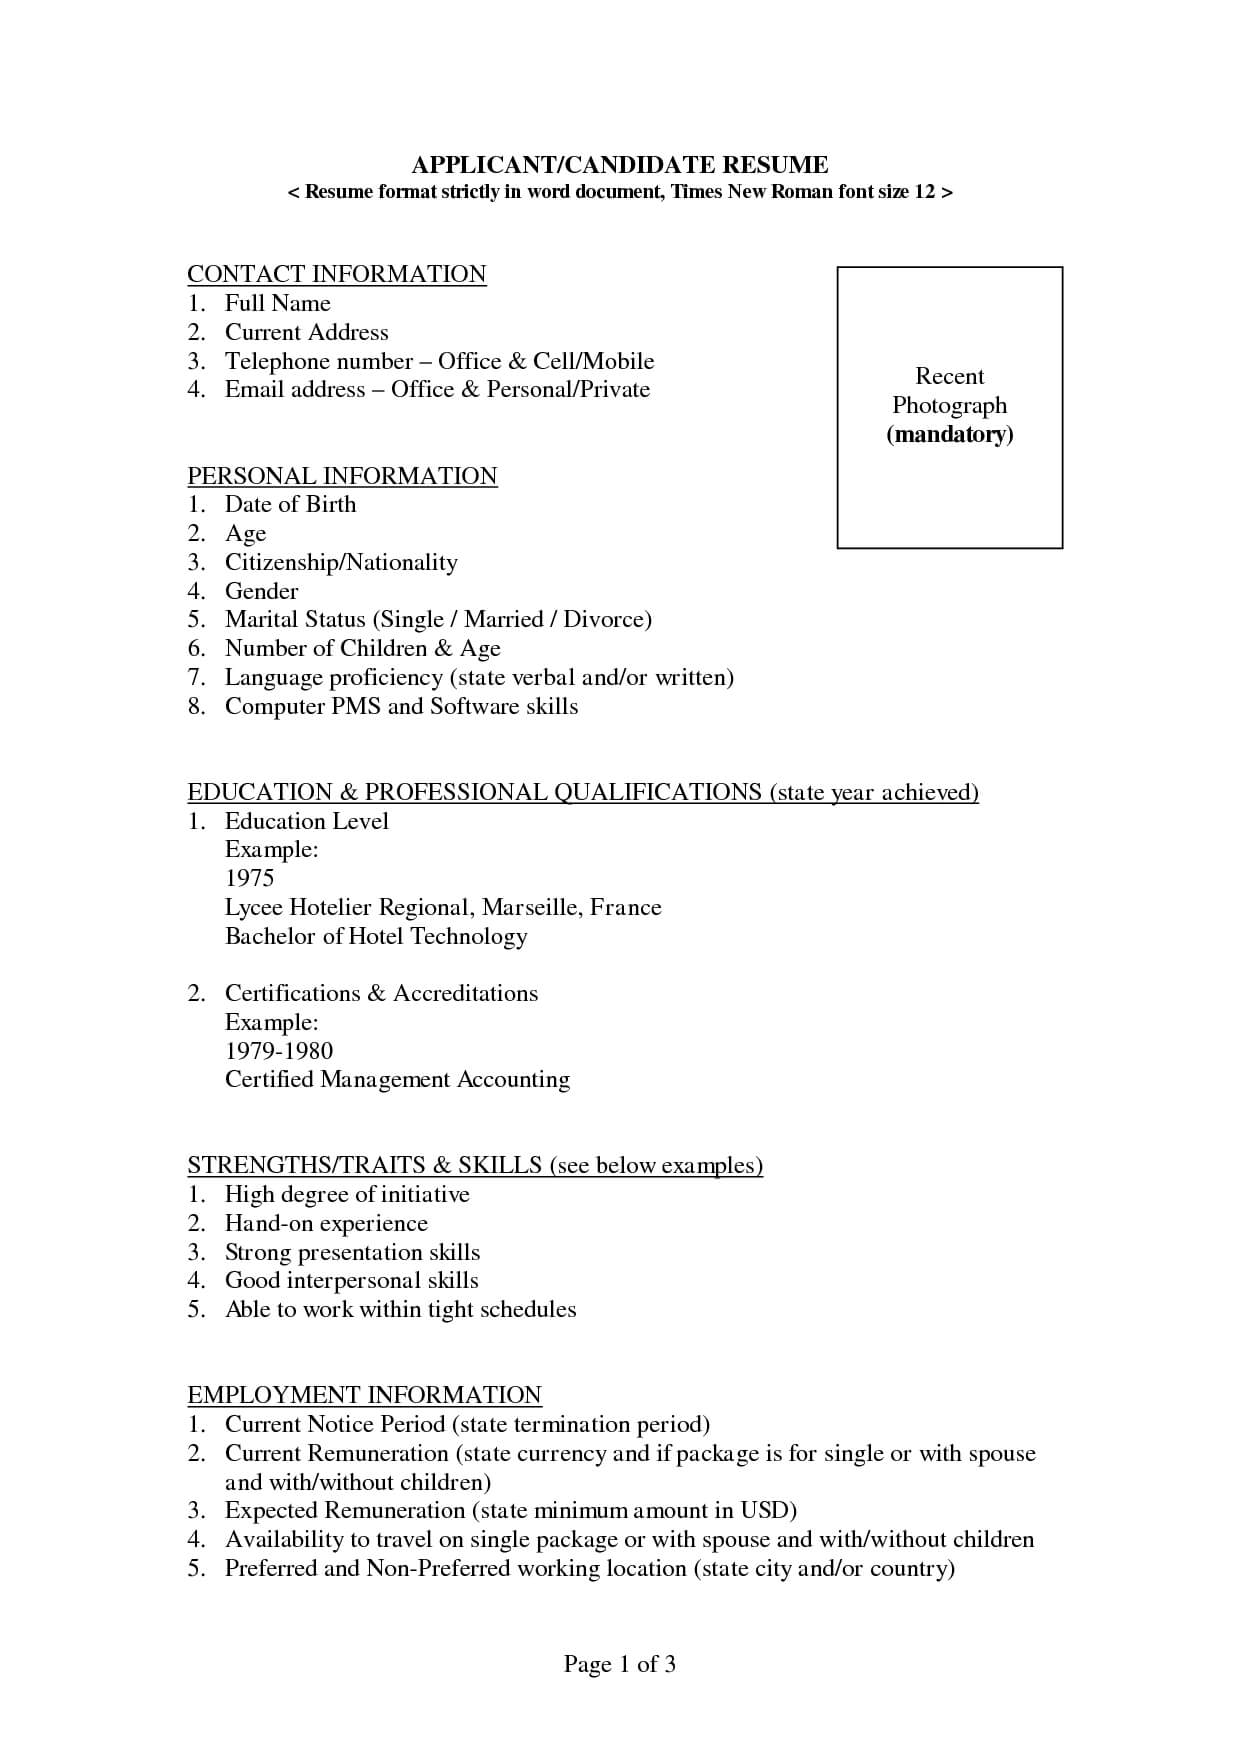 Free Blank Resume Templates For Microsoft Word | Resume Pertaining To Free Blank Resume Templates For Microsoft Word